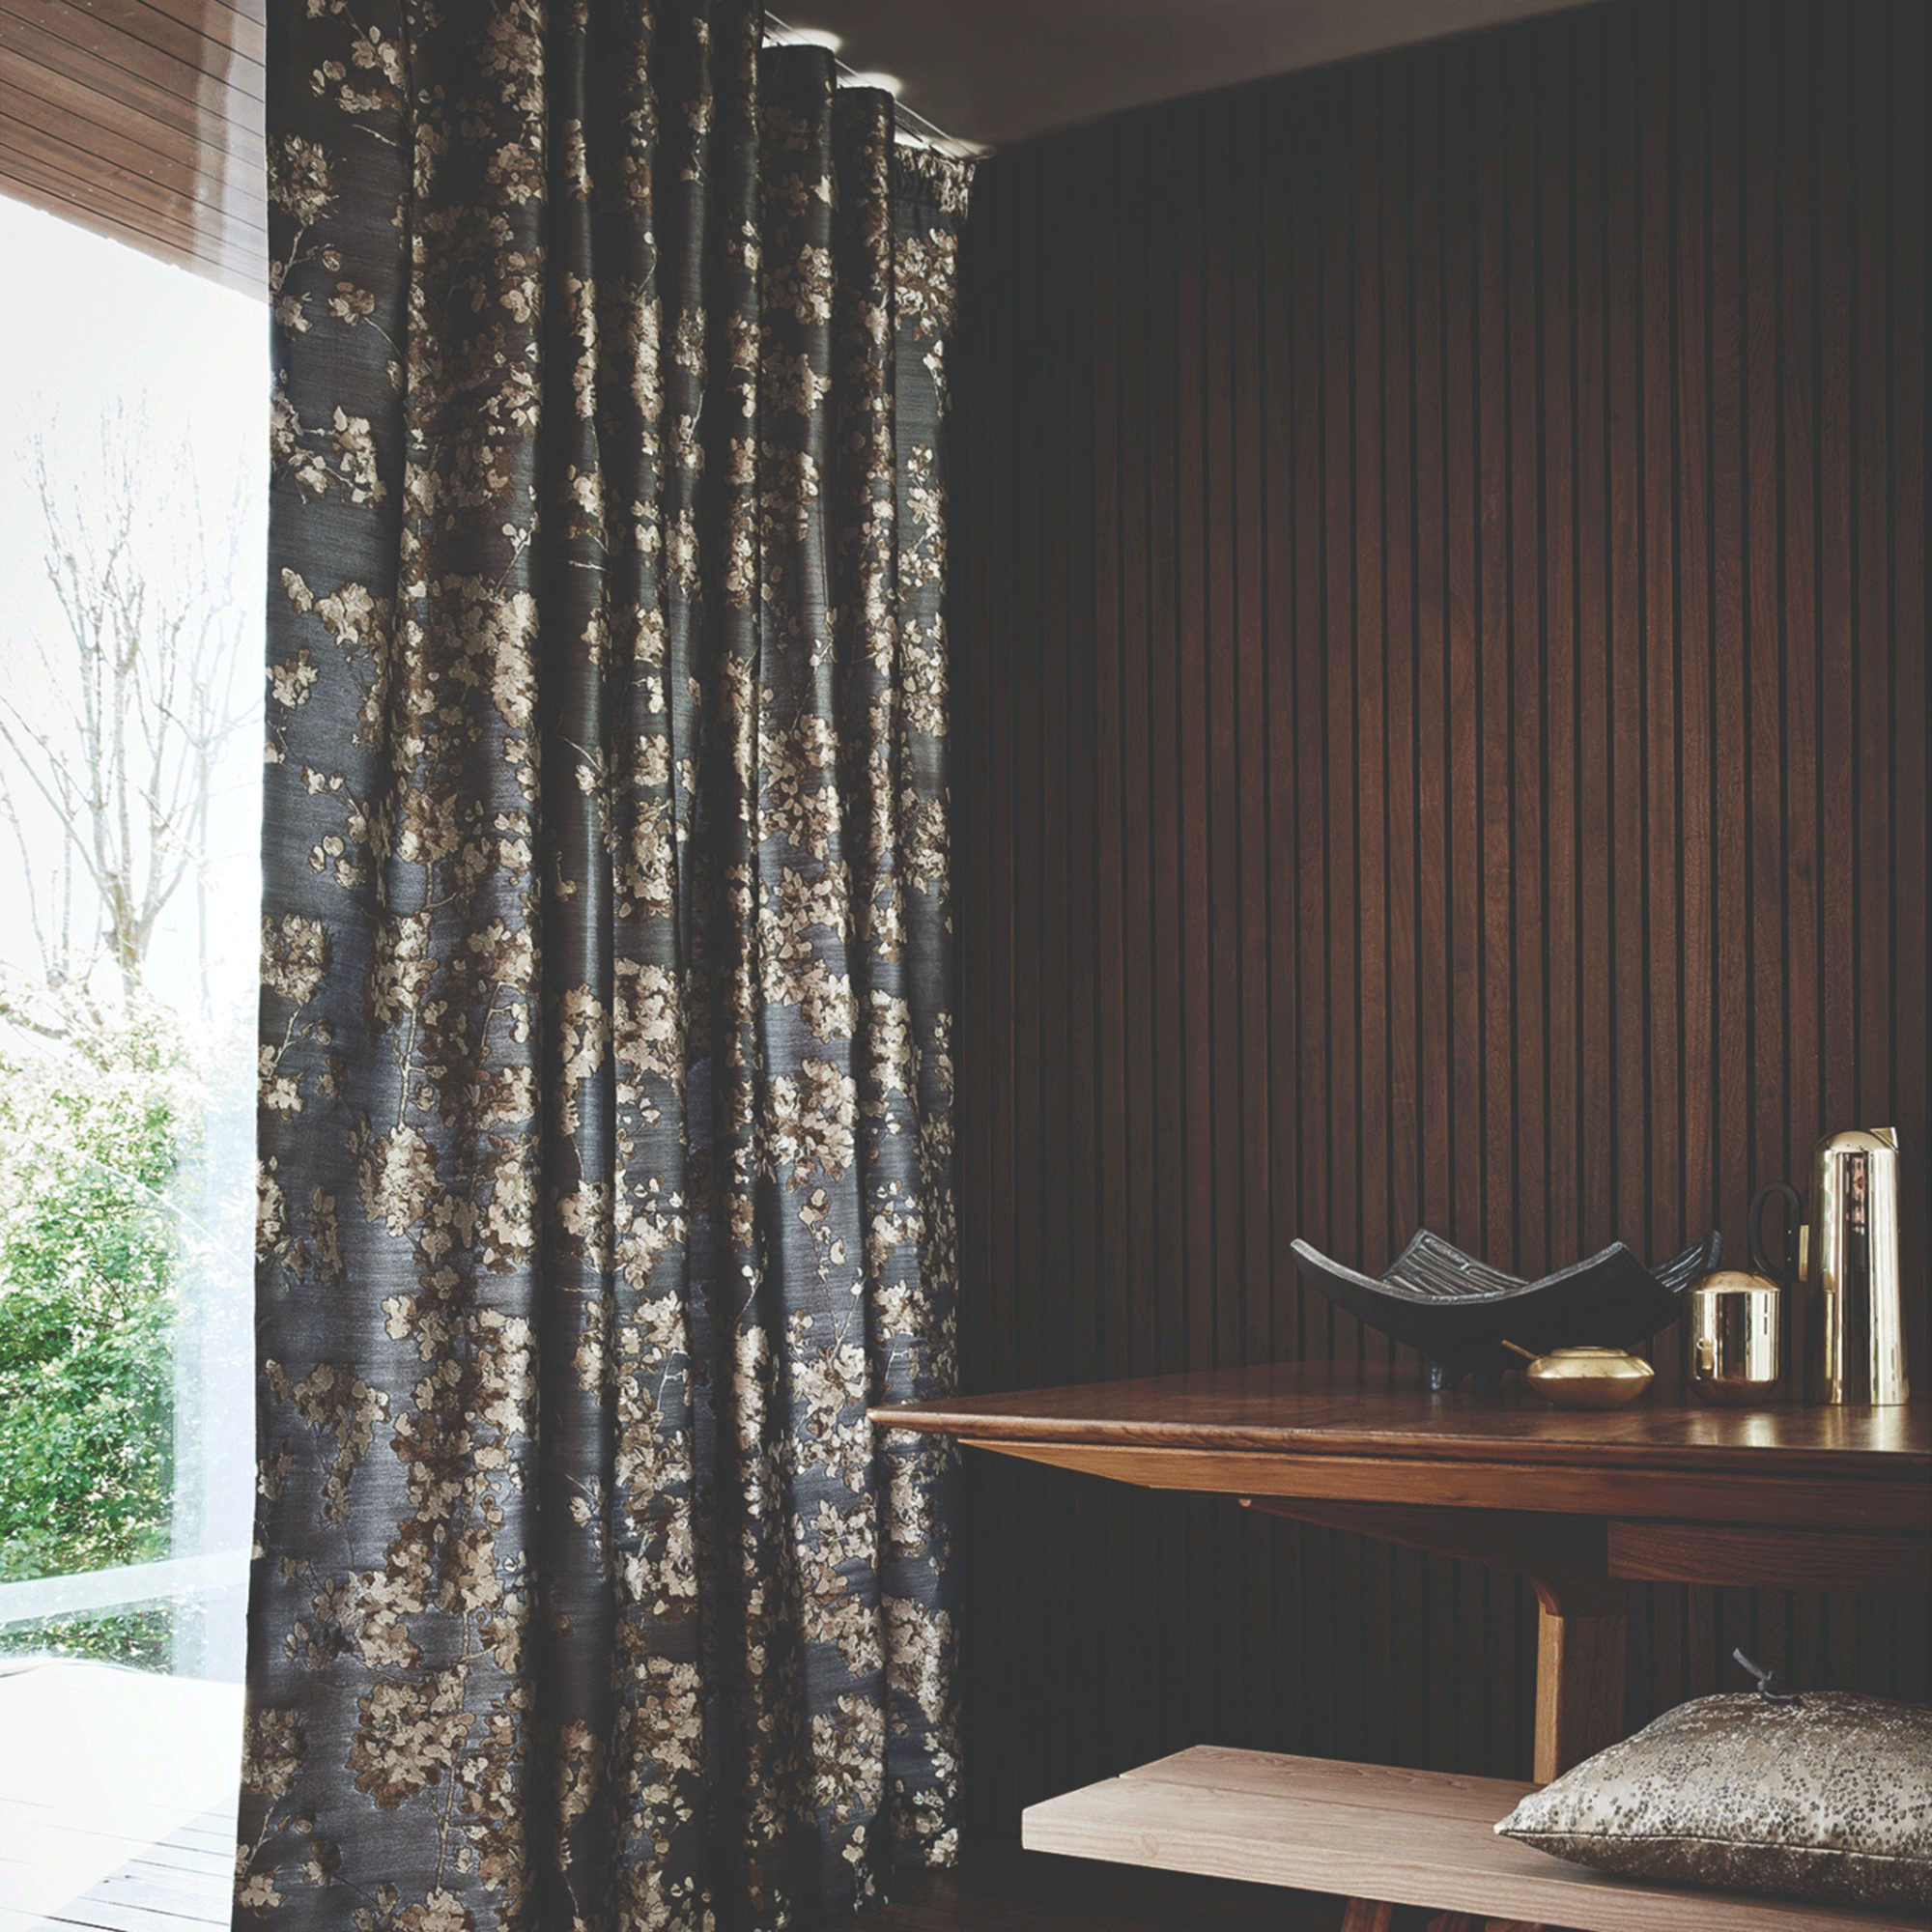 Heavy patterned curtains in brown room